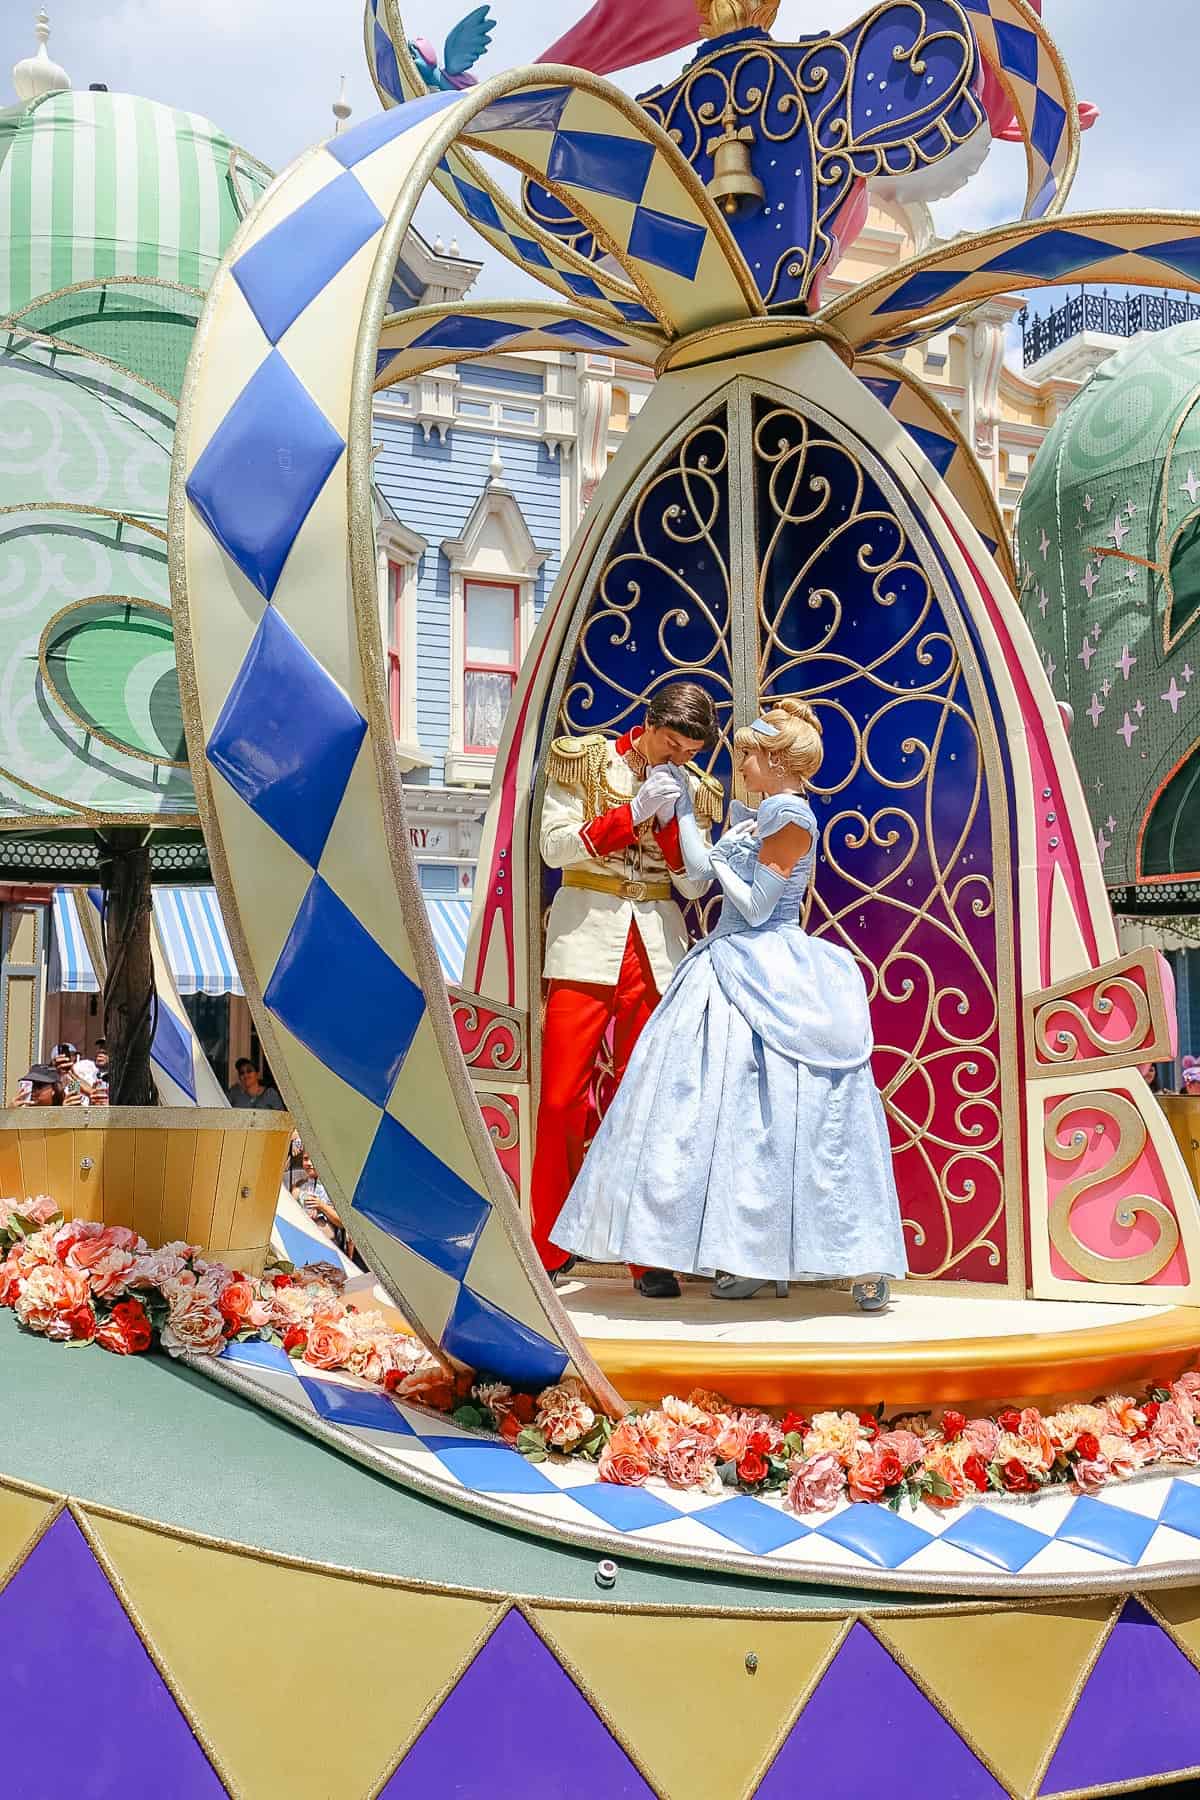 Prince Charming and Cinderella ride on the opposite side of the spinning float. 